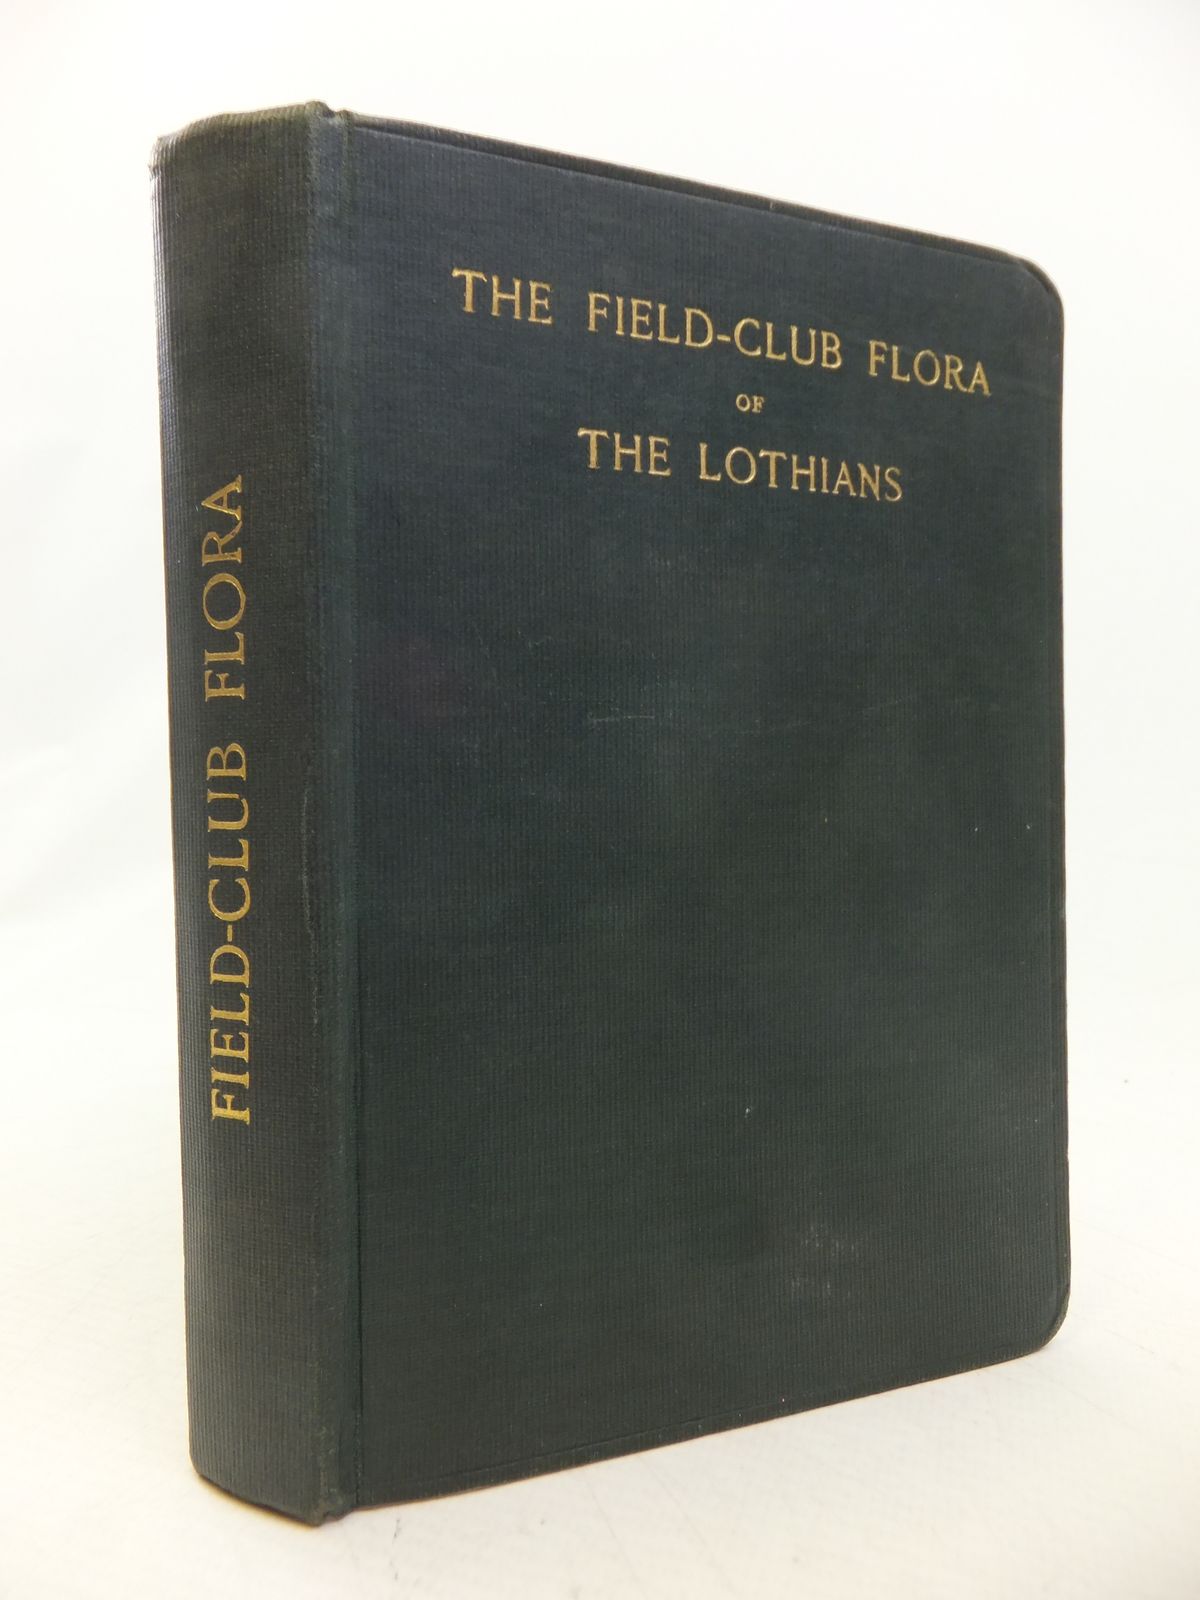 Photo of THE FIELD-CLUB FLORA OF THE LOTHIANS written by Martin, Isa. published by William Blackwood (STOCK CODE: 1809103)  for sale by Stella & Rose's Books